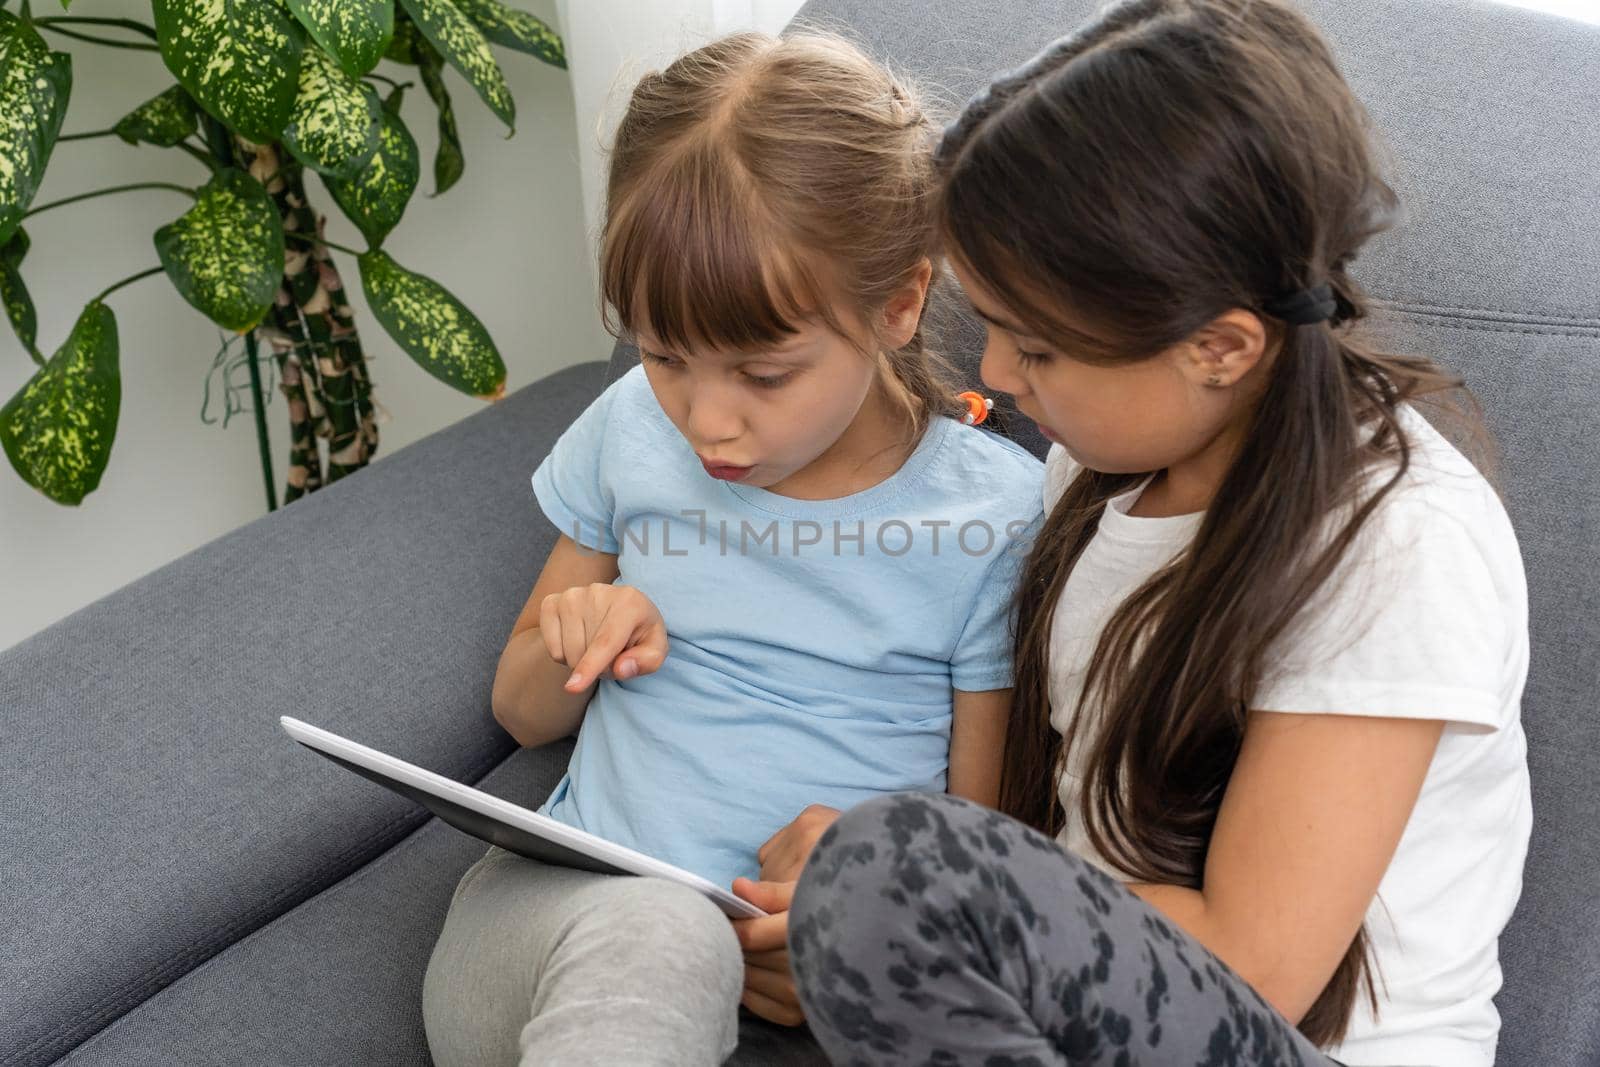 Closeup portrait of two smiling girls lying on couch and using tablet.